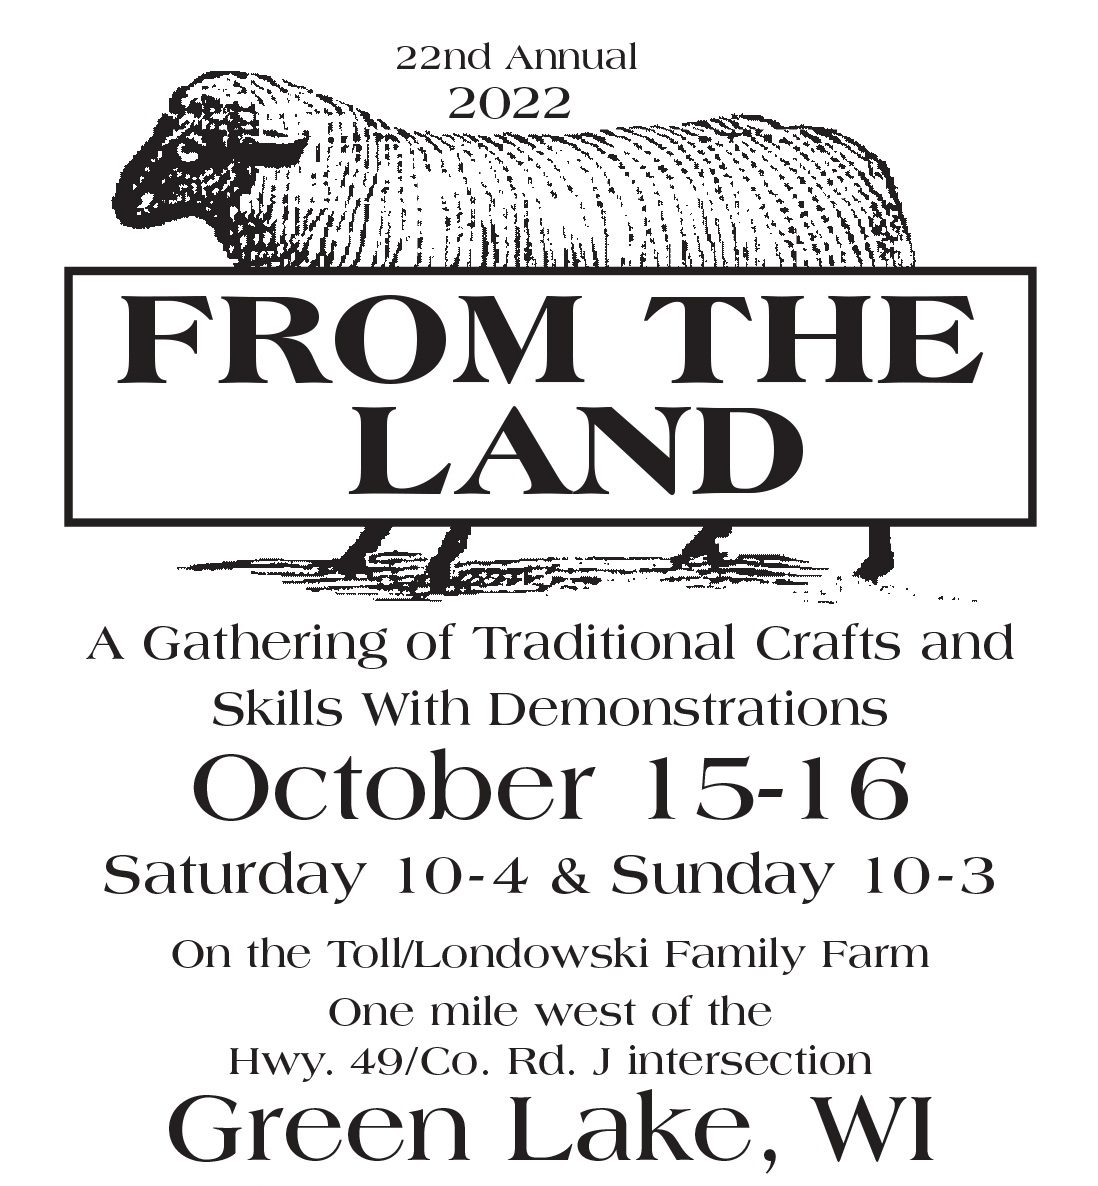 Save the Date: From the Land Festival, Oct 15-16th, 2022